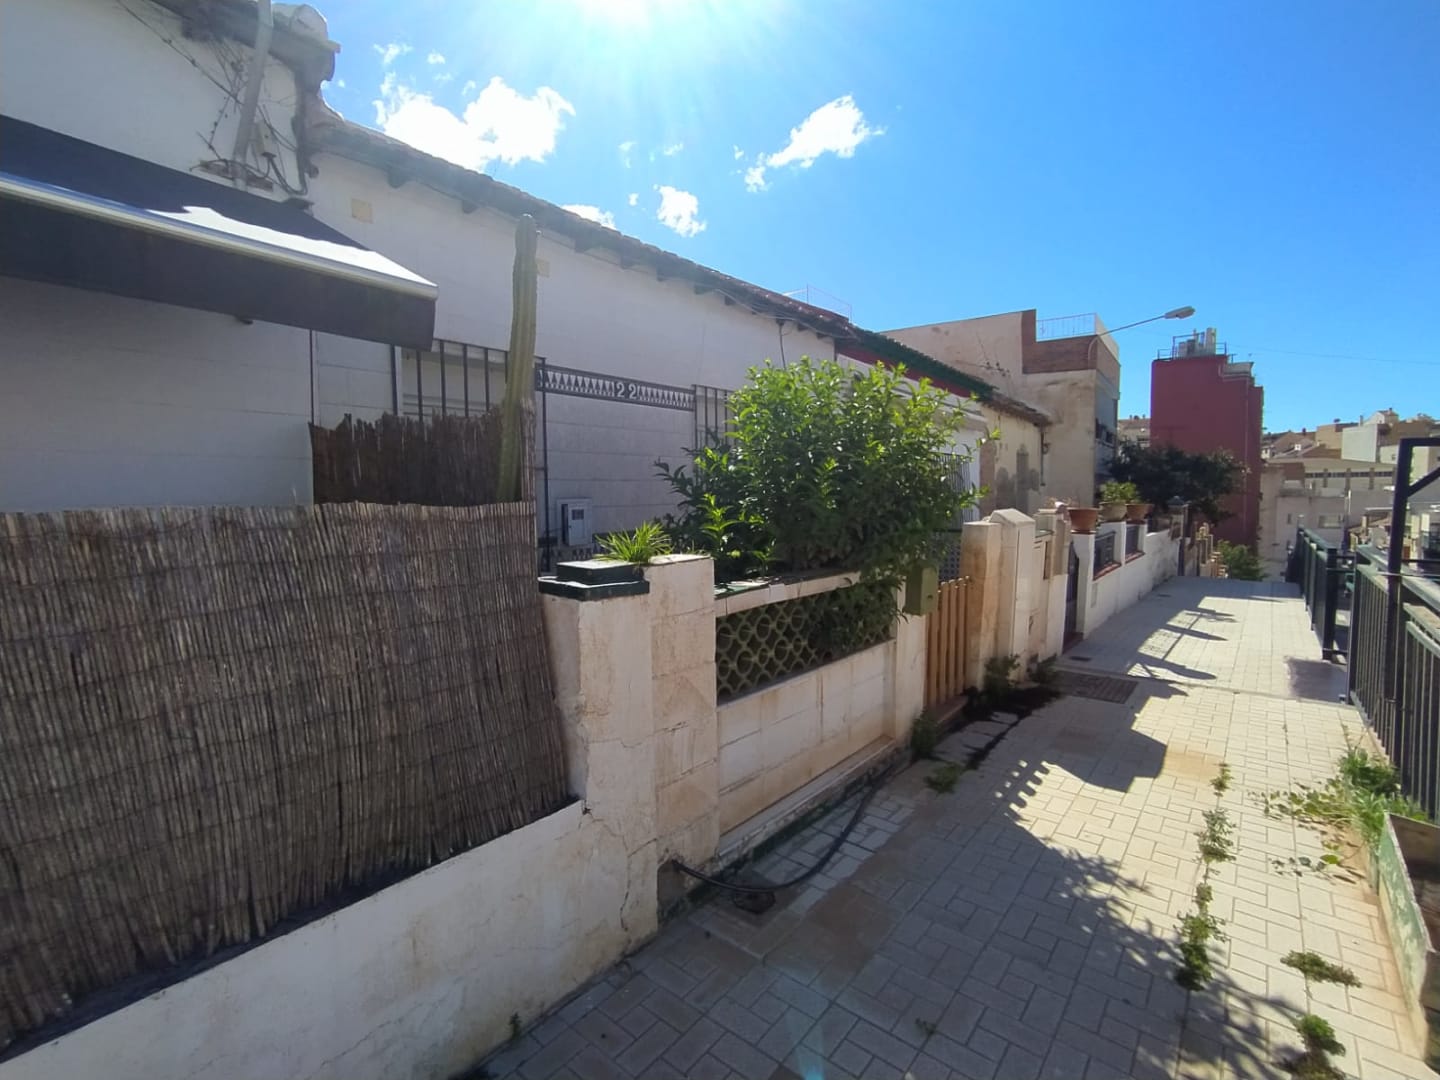 LOT OF 3 HOUSES FOR SALE IN MALAGA